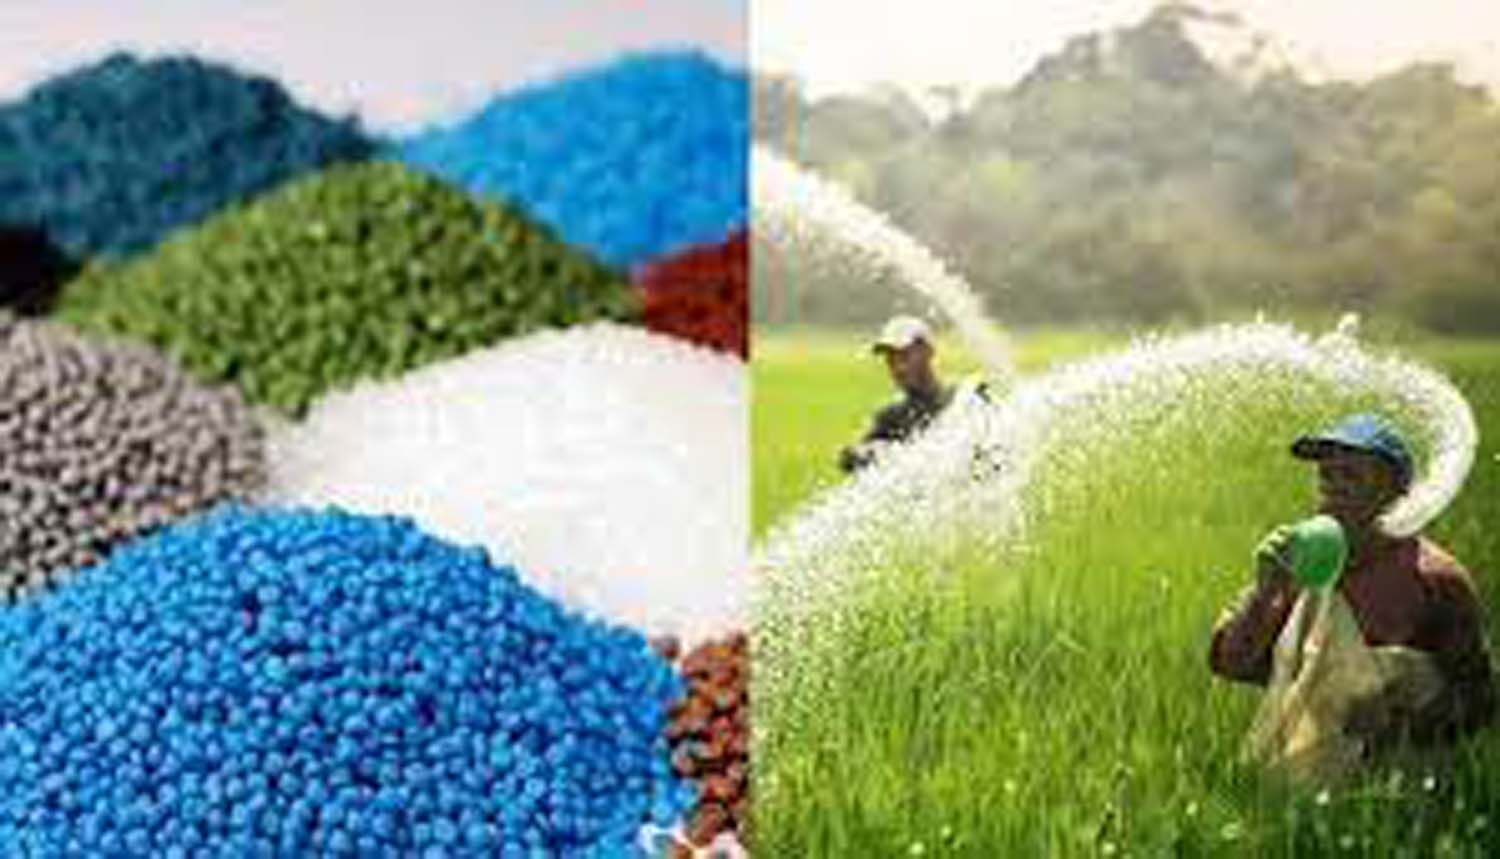 Protect Farms From Chemical Fertilizers : Protect Farms From Chemical Fertilizers